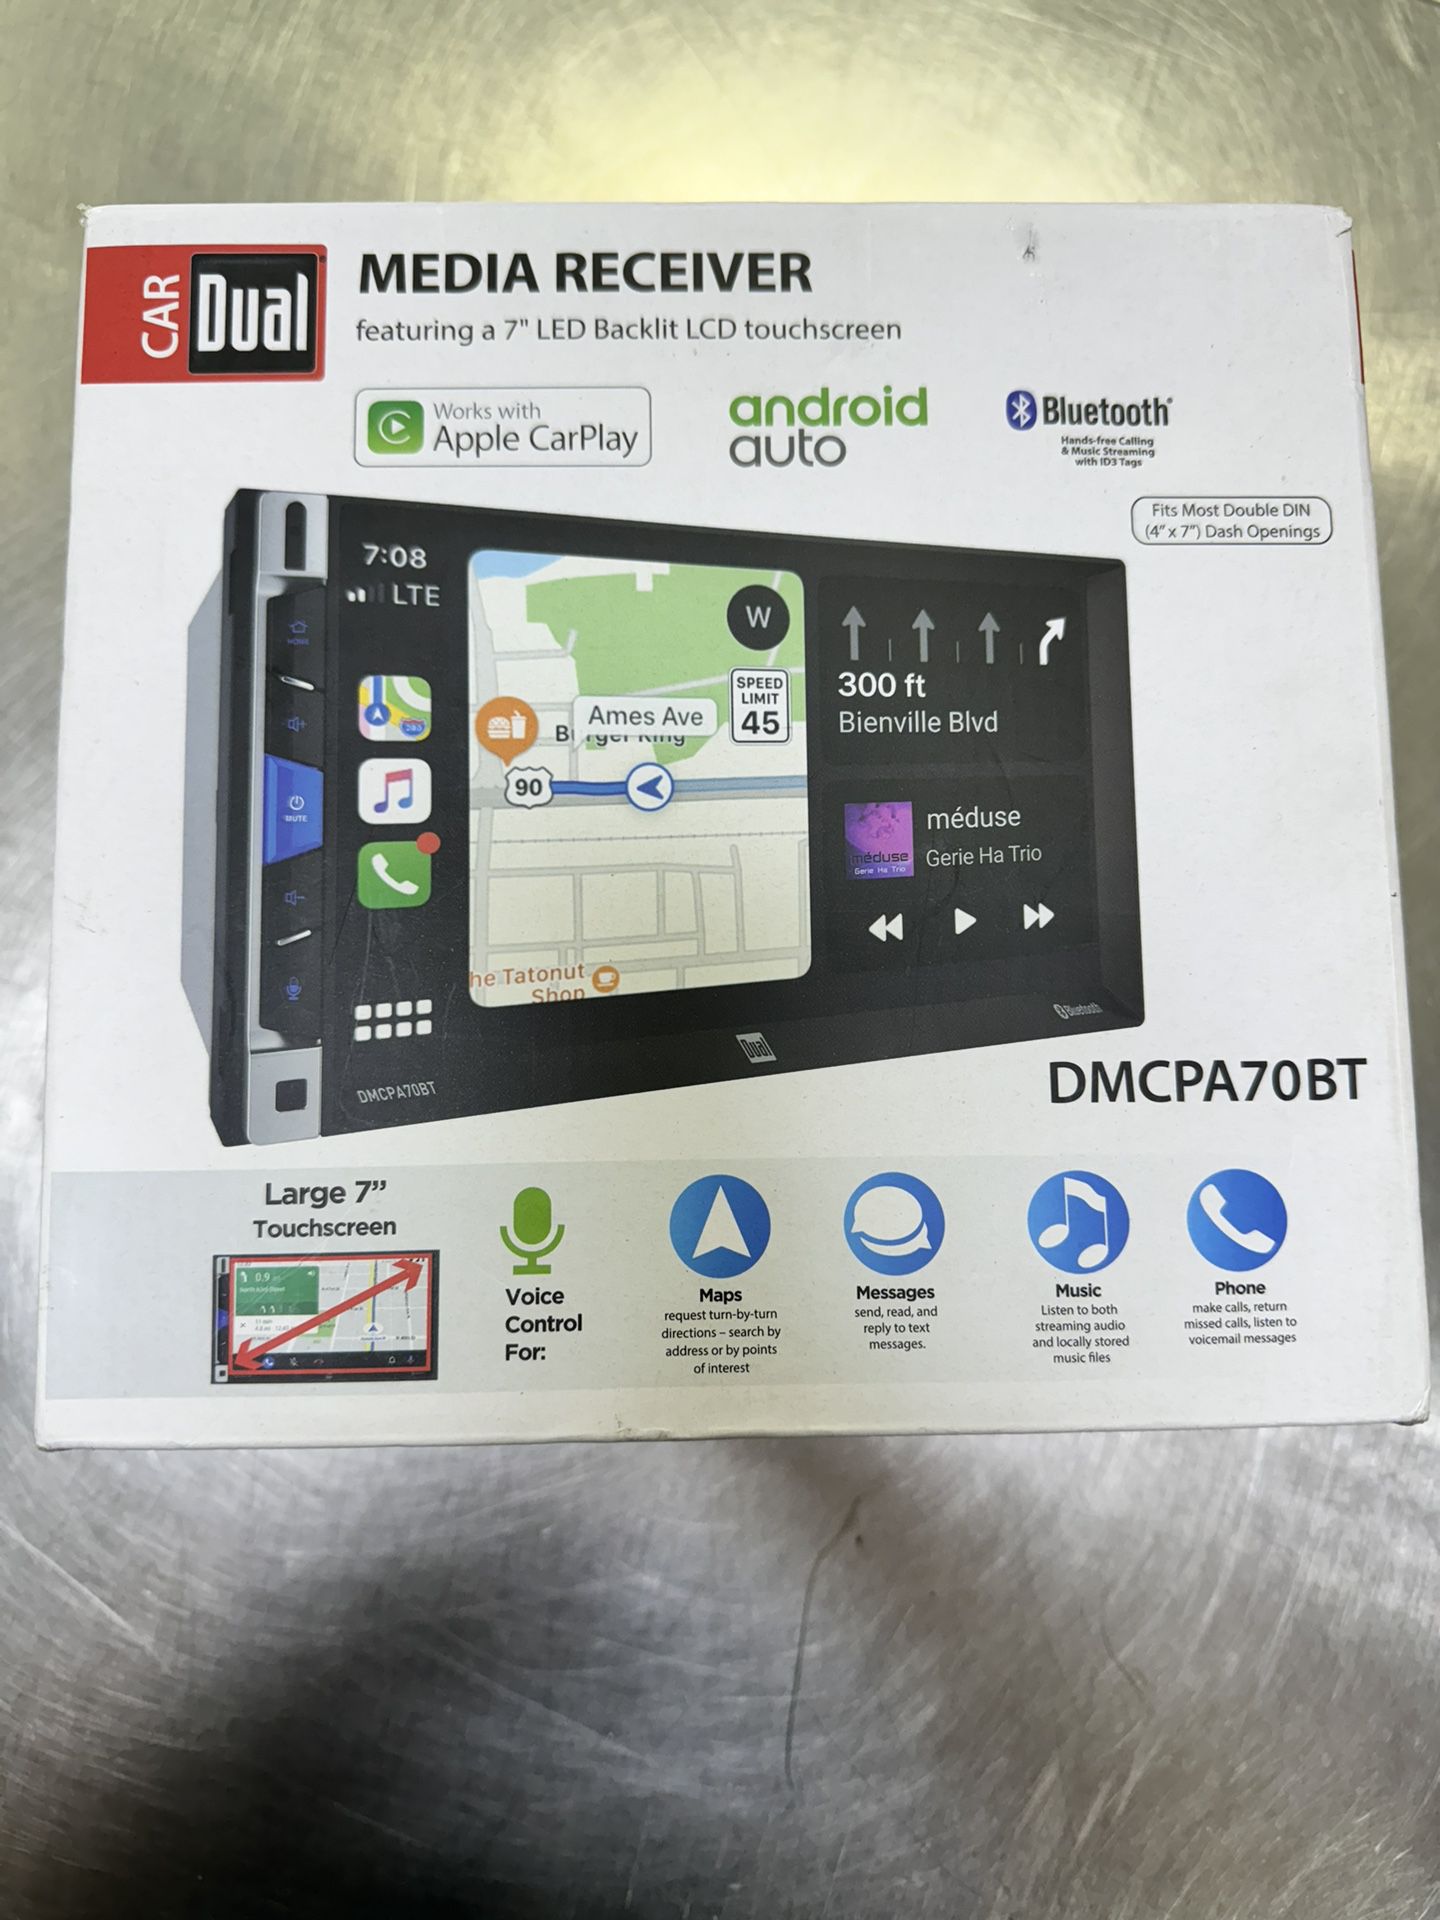 AV Media Receiver with Apple CarPlay and Android Auto – DMCPA70BT